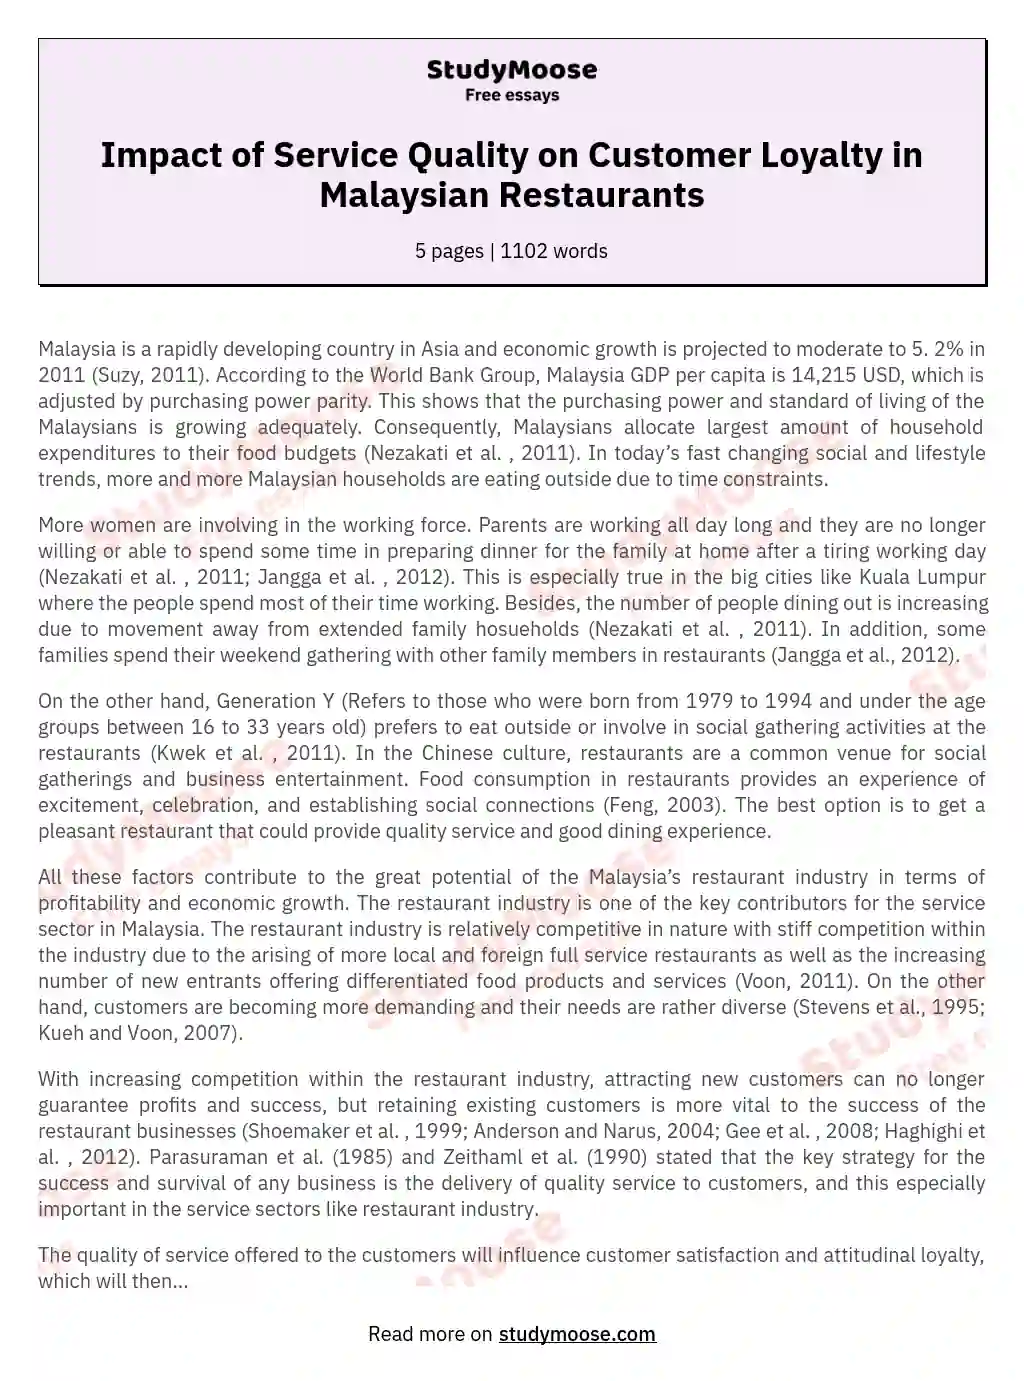 Impact of Service Quality on Customer Loyalty in Malaysian Restaurants